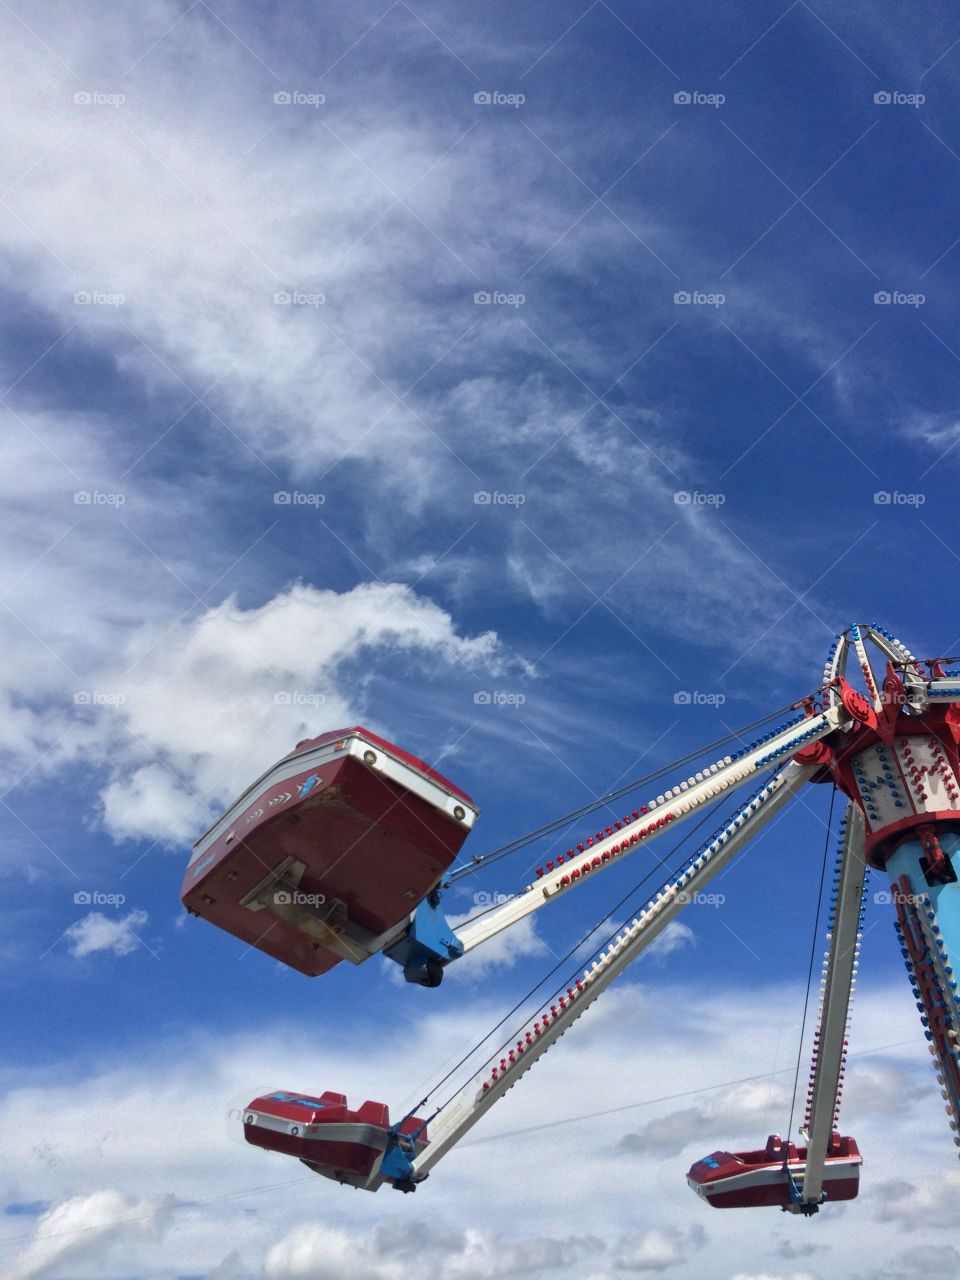 Moods of the weather, beautiful blue sky with white clouds during a carnival ride